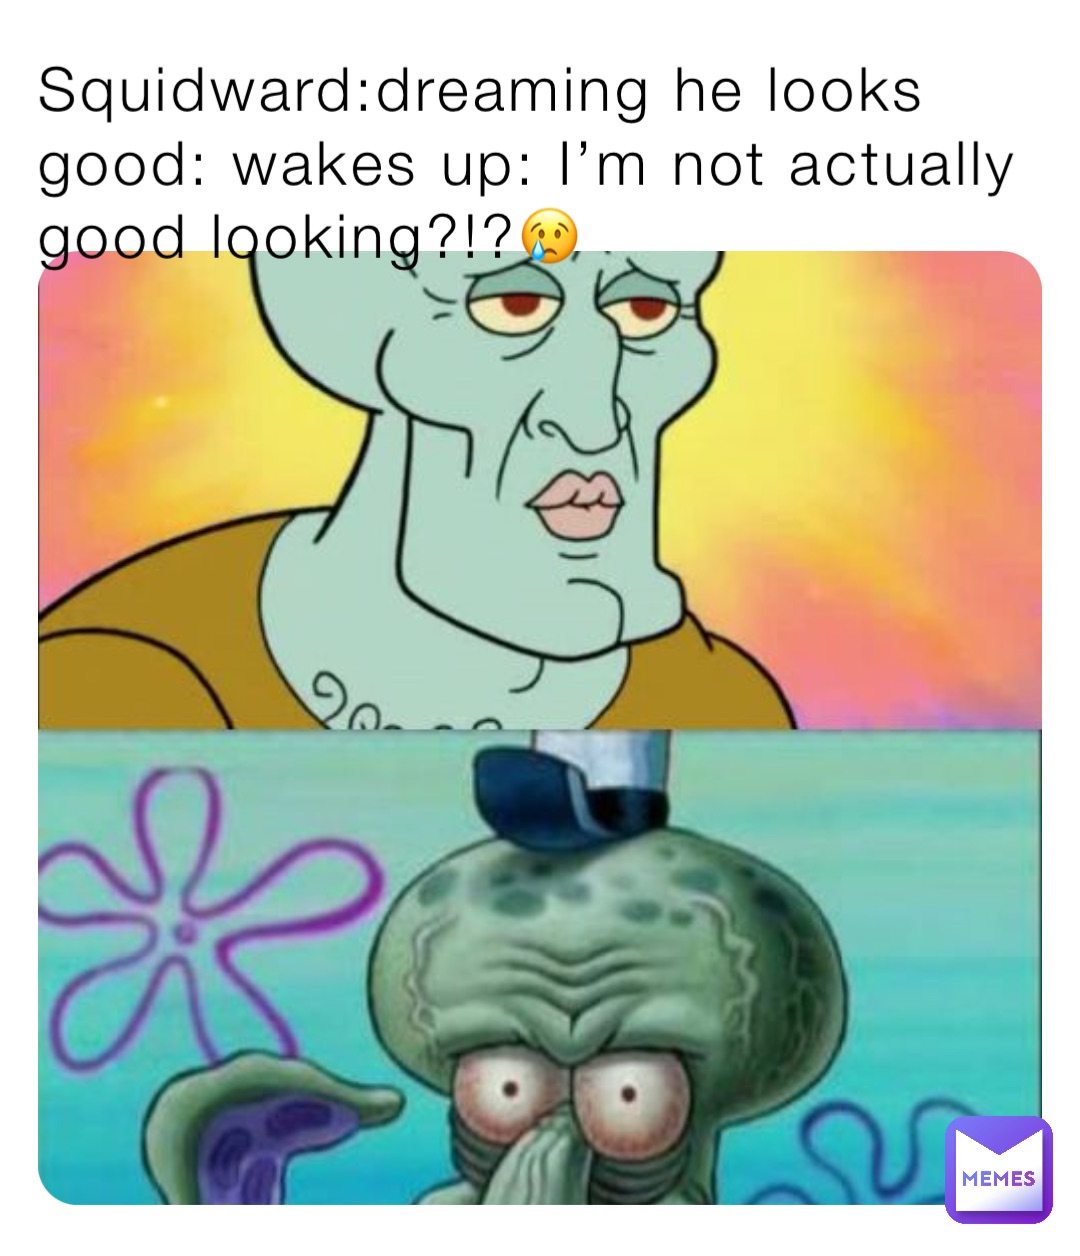 Squidward:dreaming he looks good: wakes up: I’m not actually good looking?!?😢